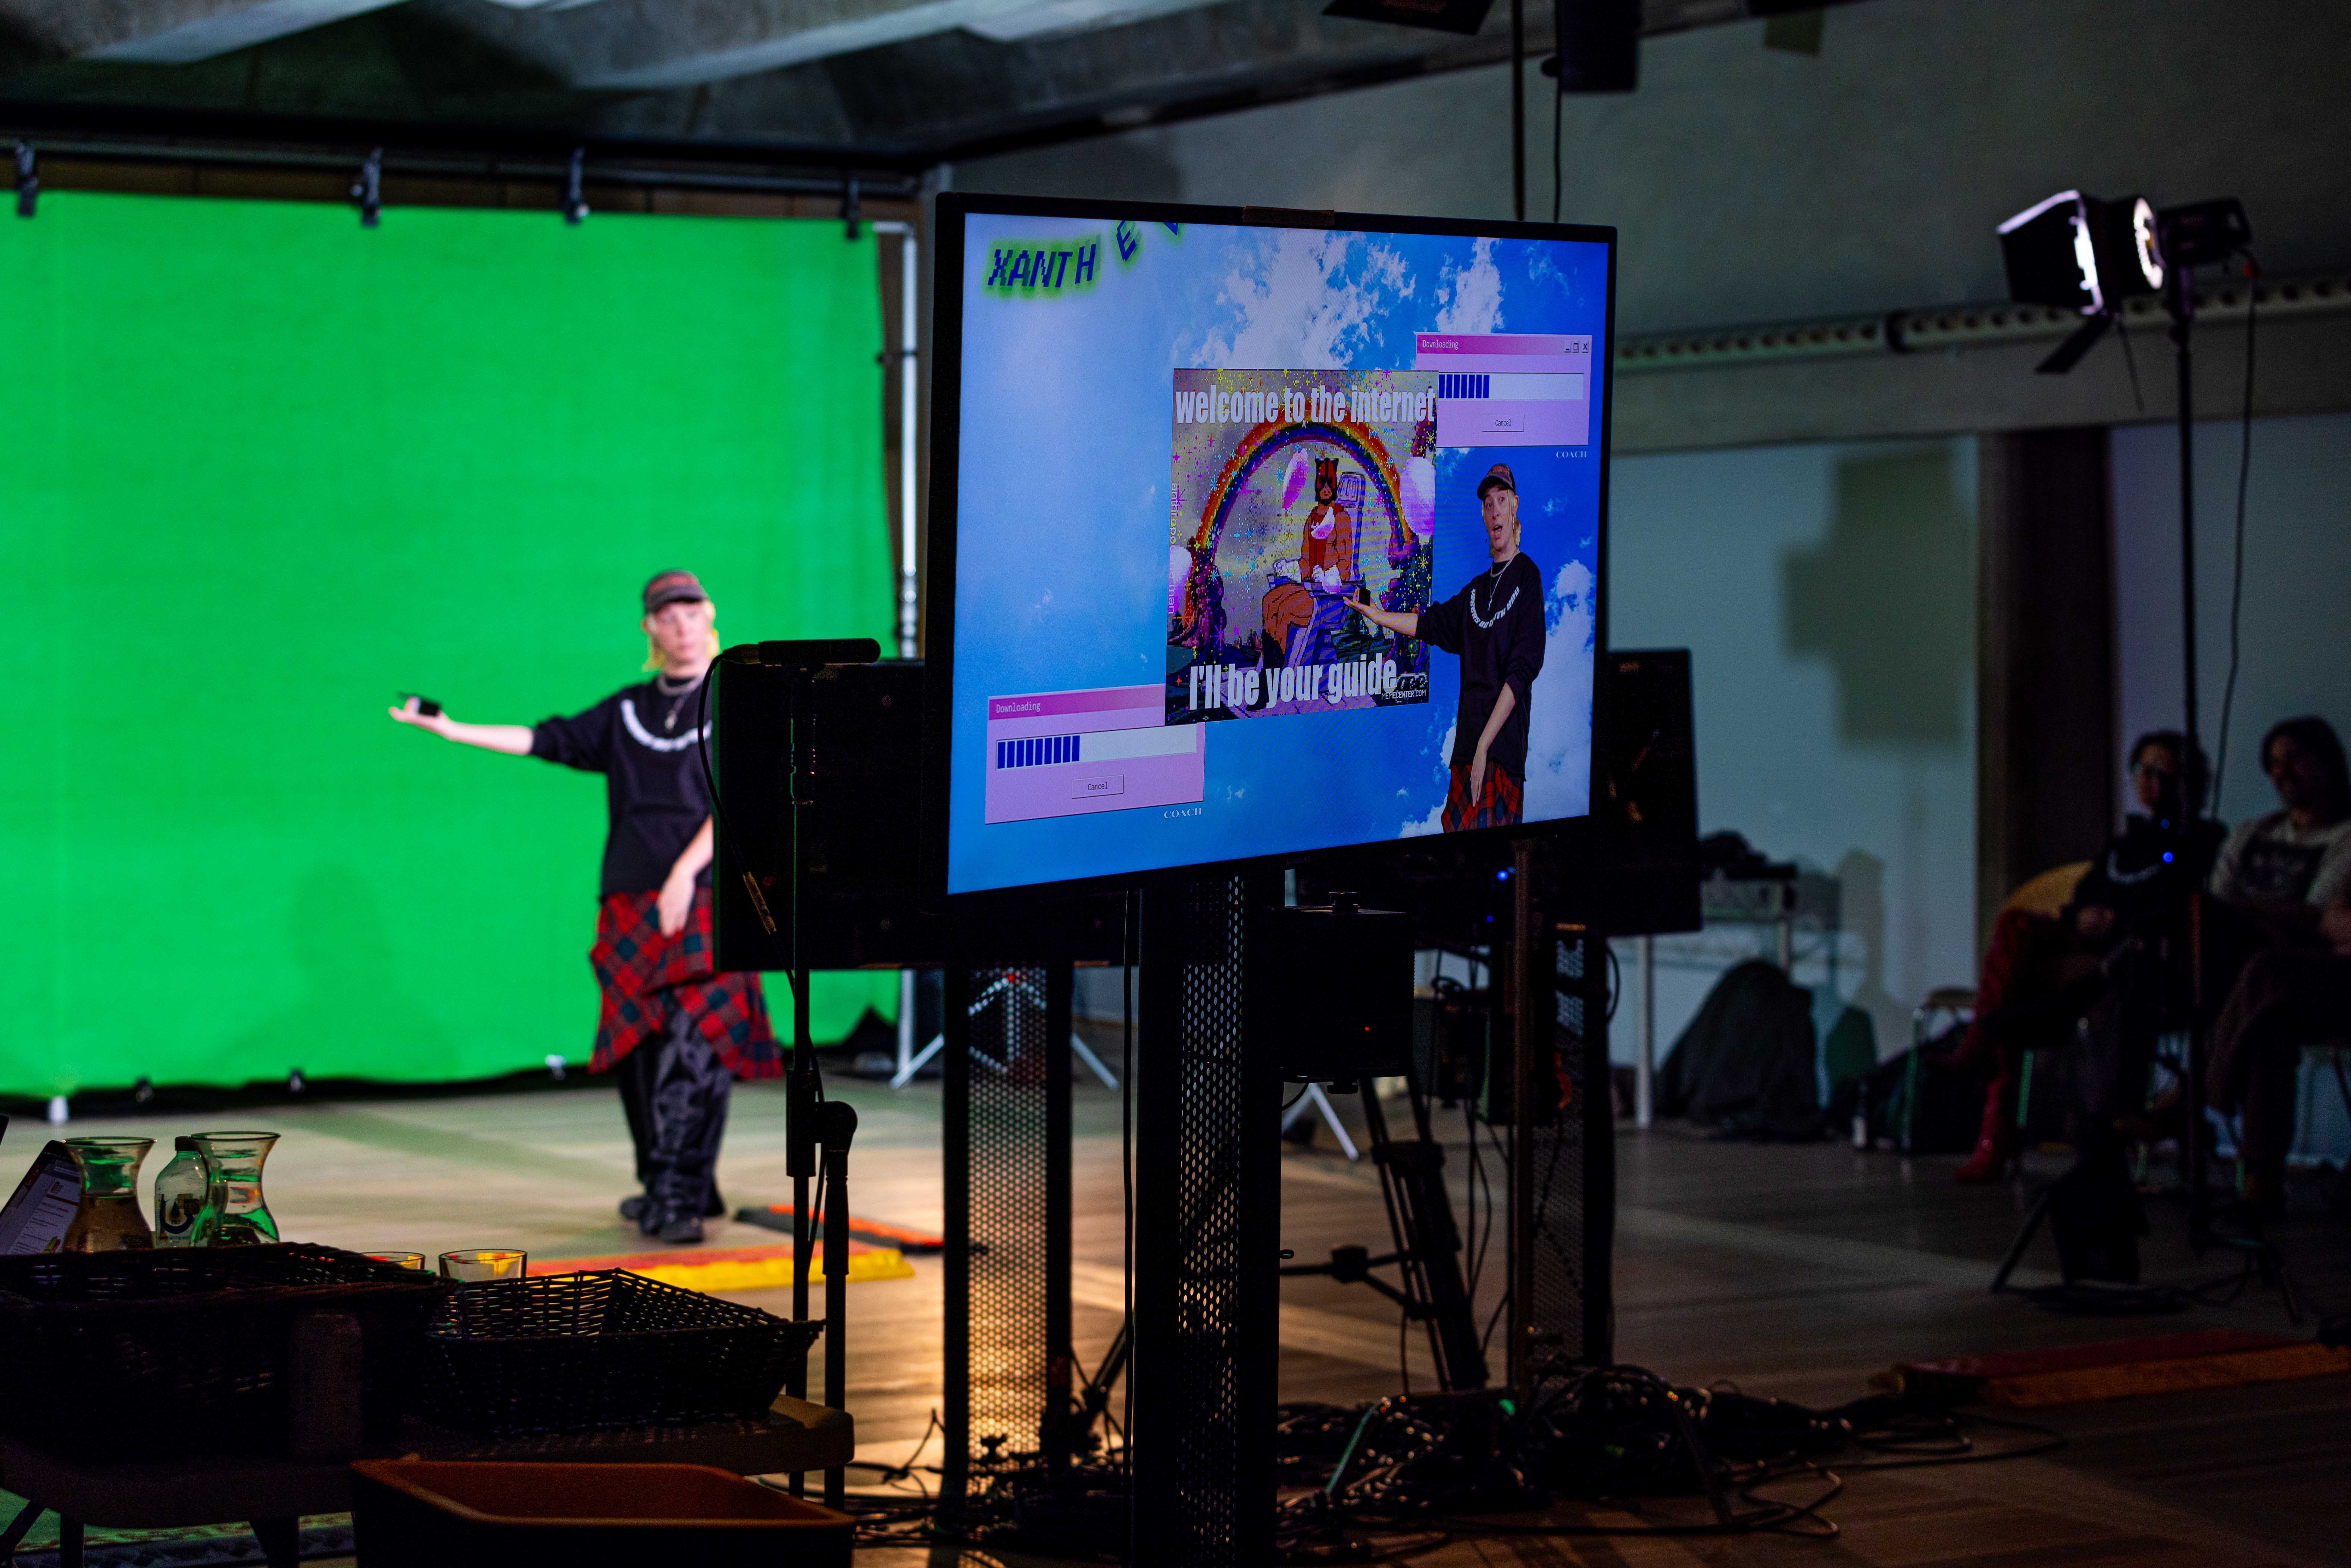 Producer's view through a screen showing a digital background, of a performer in front of a green screen